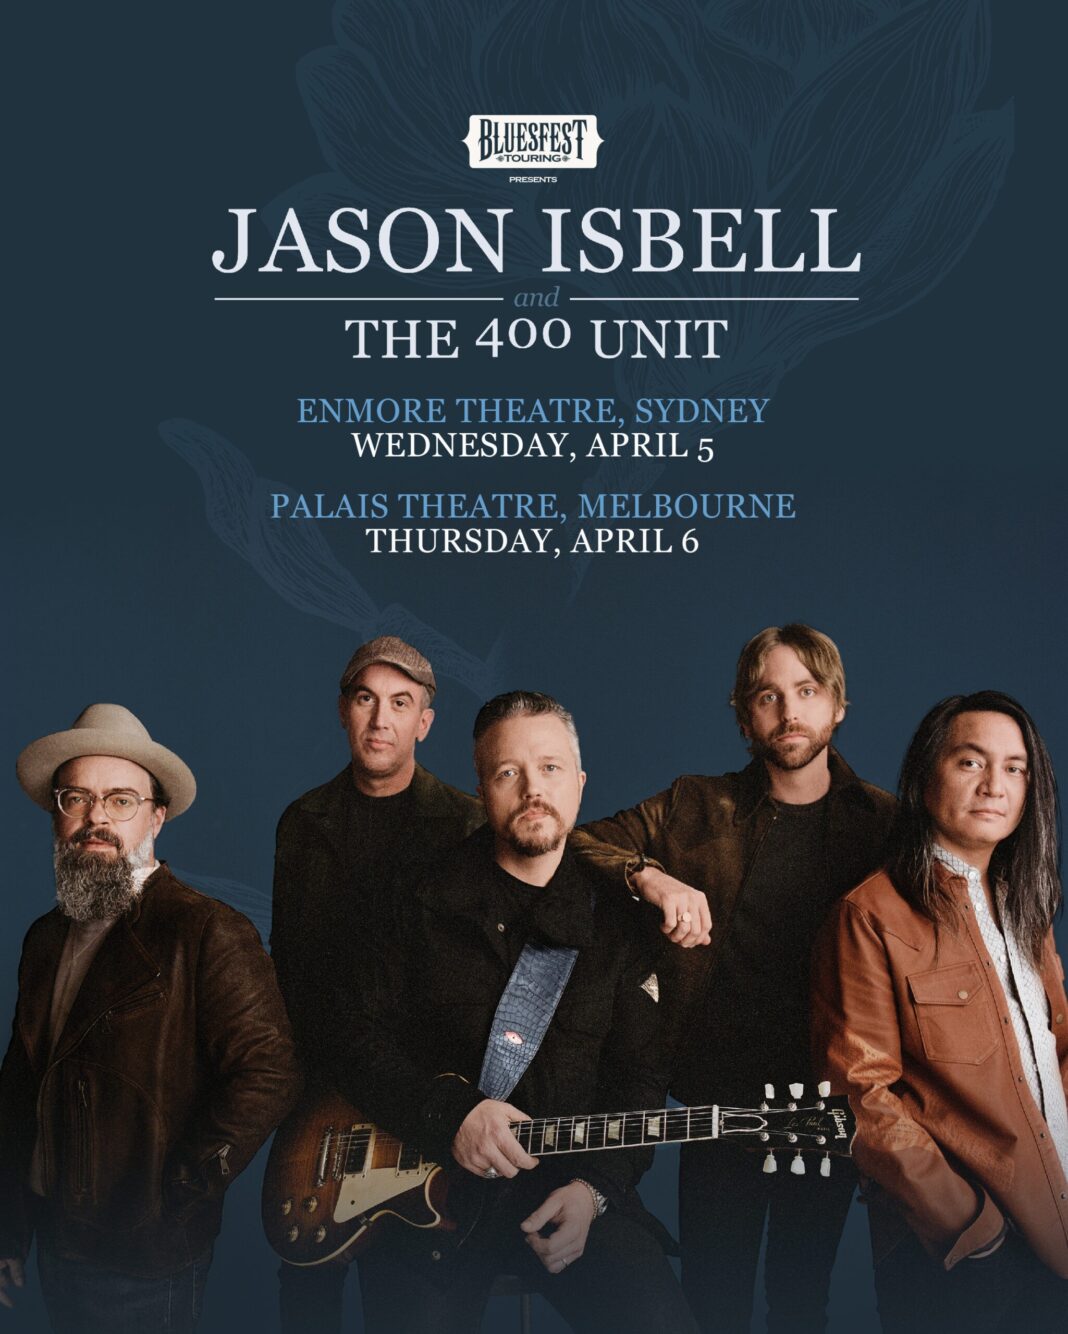 jason isbell and the 400 unit – aus tour, just announced! ⭐